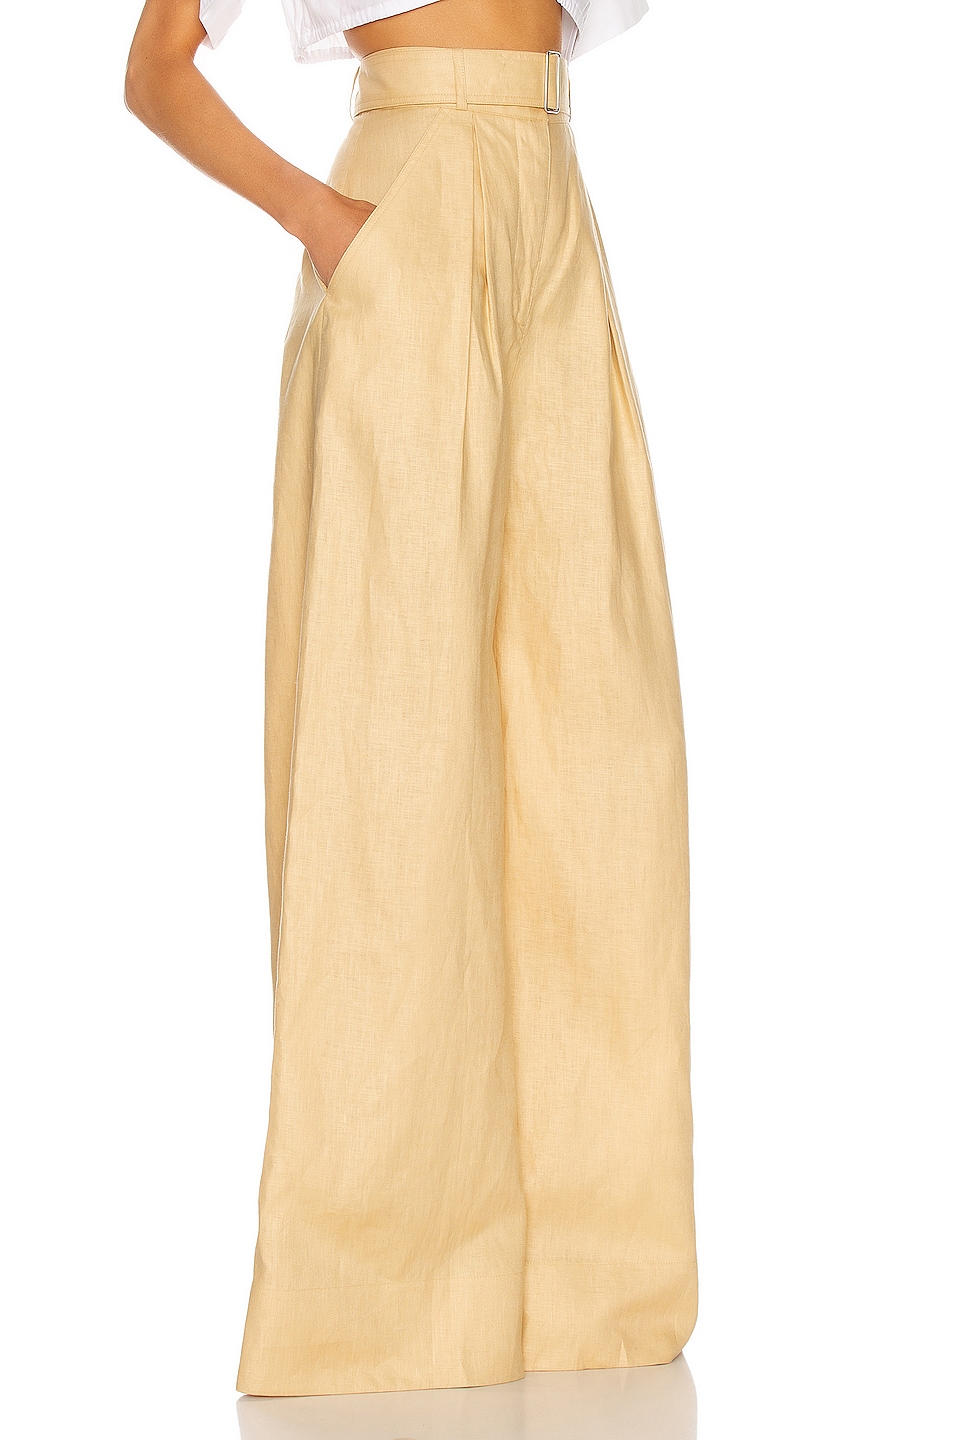 MATTHEW BRUCH Pleated Wide Leg Pant in Pale Yellow | FWRD